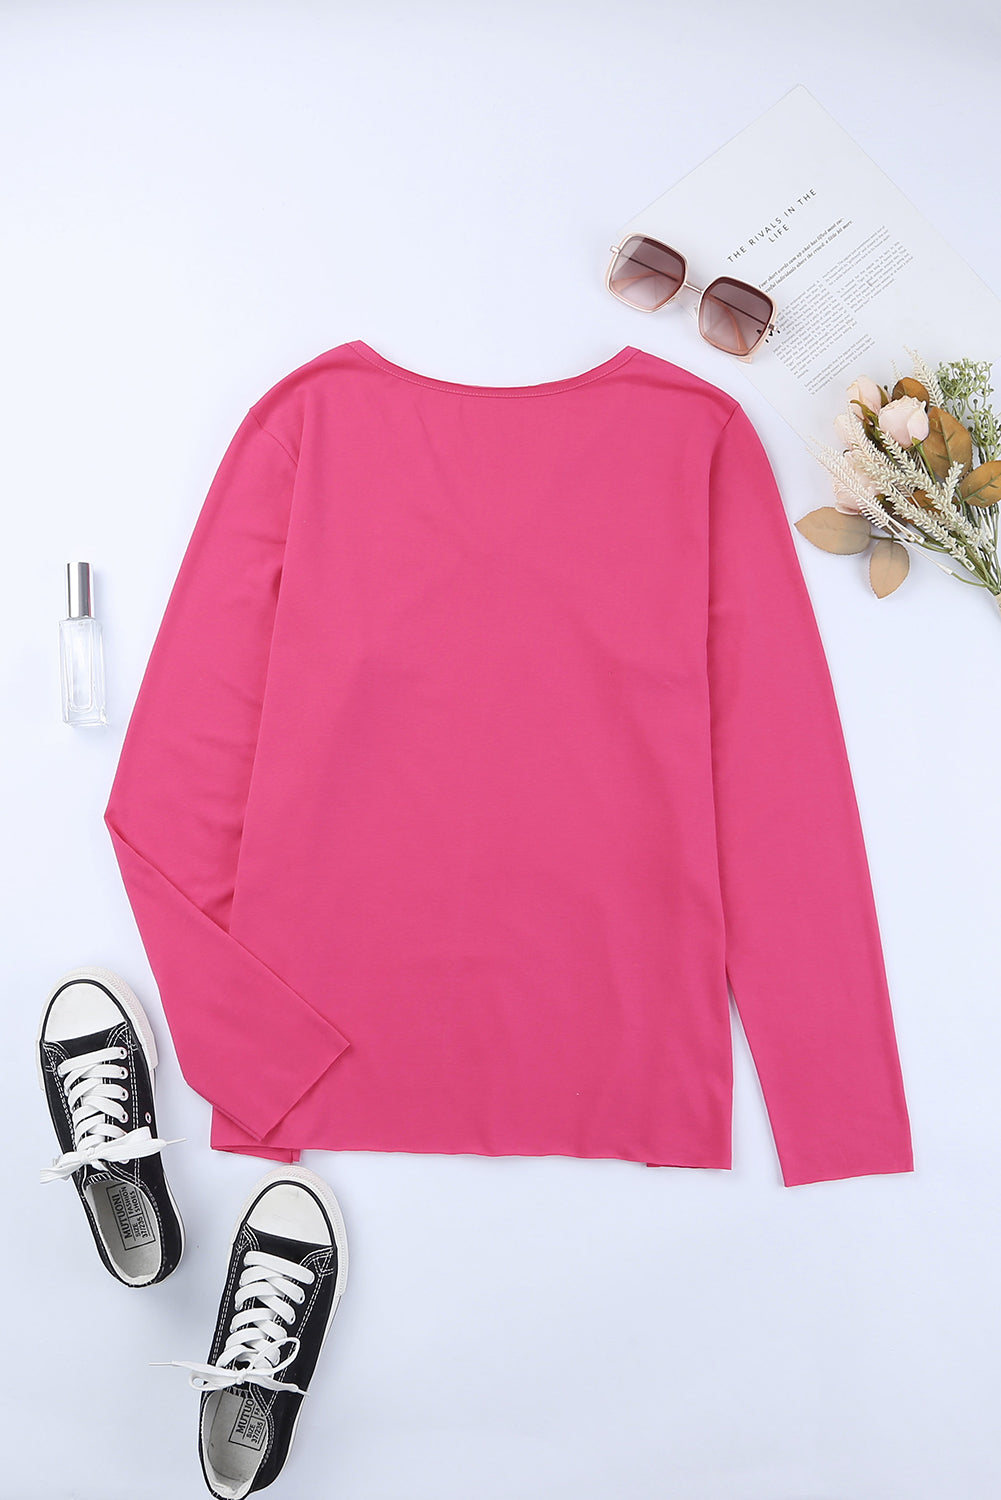 Pink V Neck Buttons Long Sleeve Top